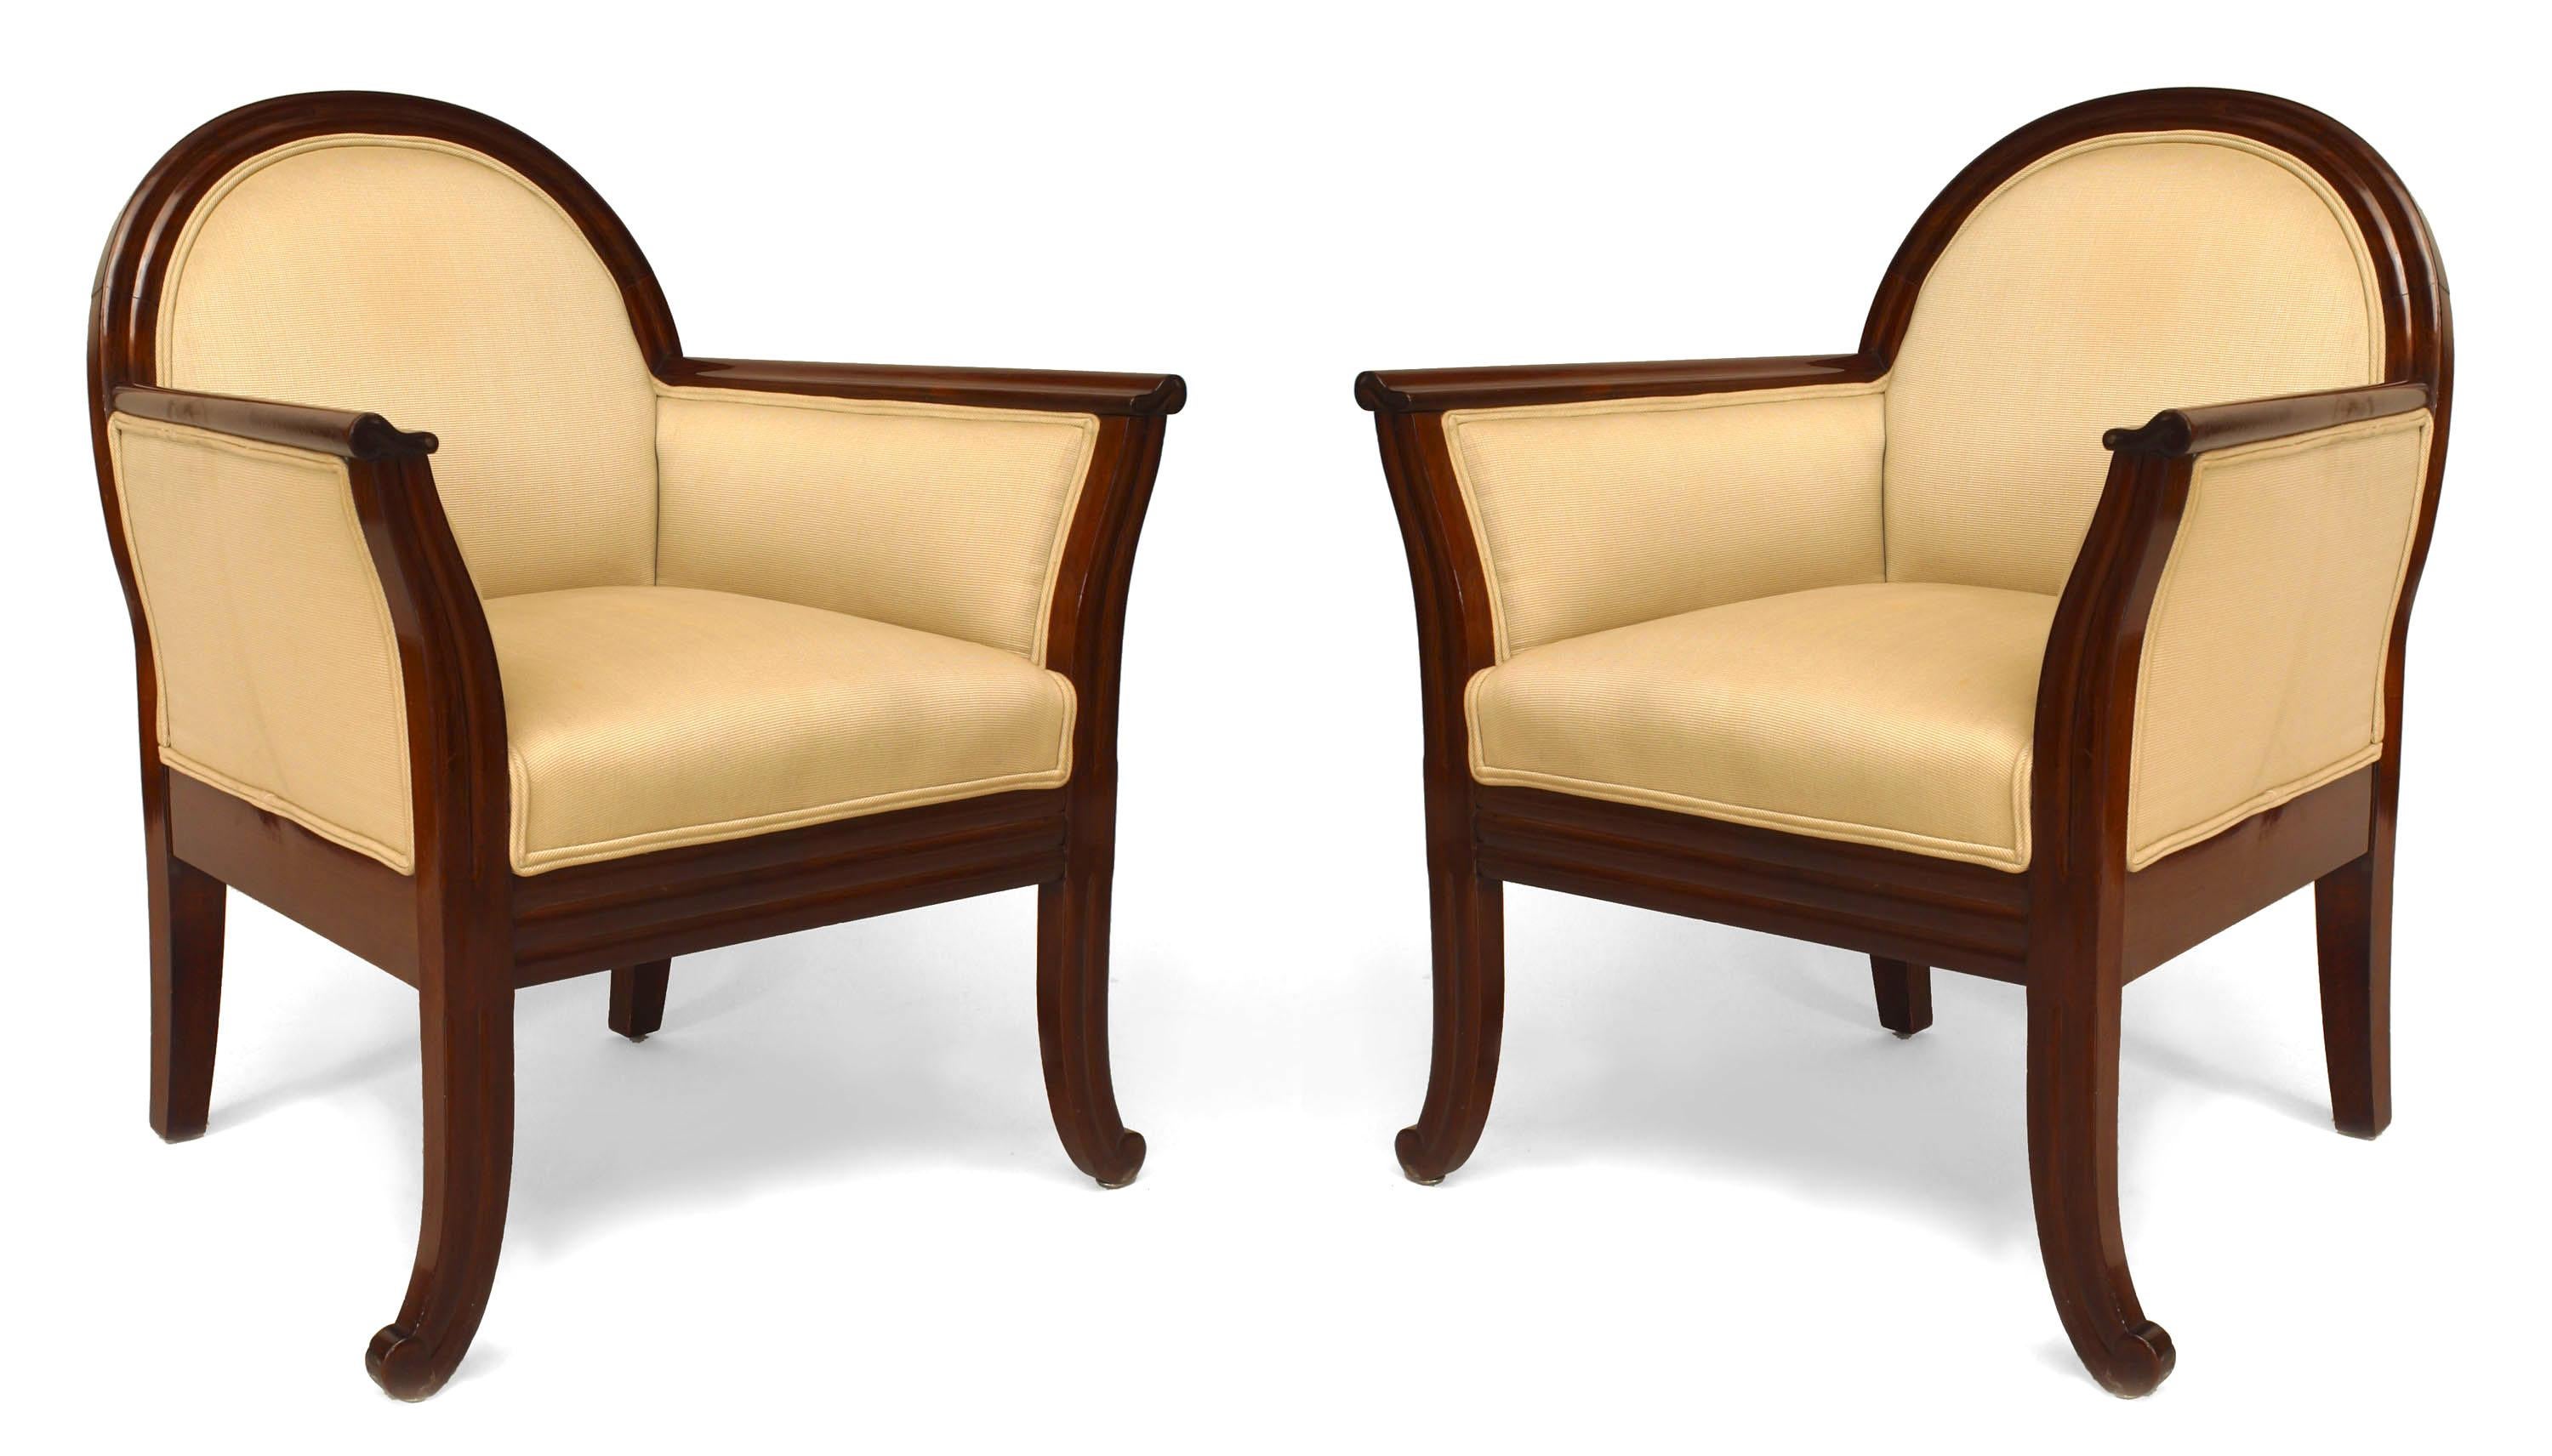 Pair of French Art Deco style mahogany club chairs with a rounded back and flared design front arms and legs with beige upholstery
